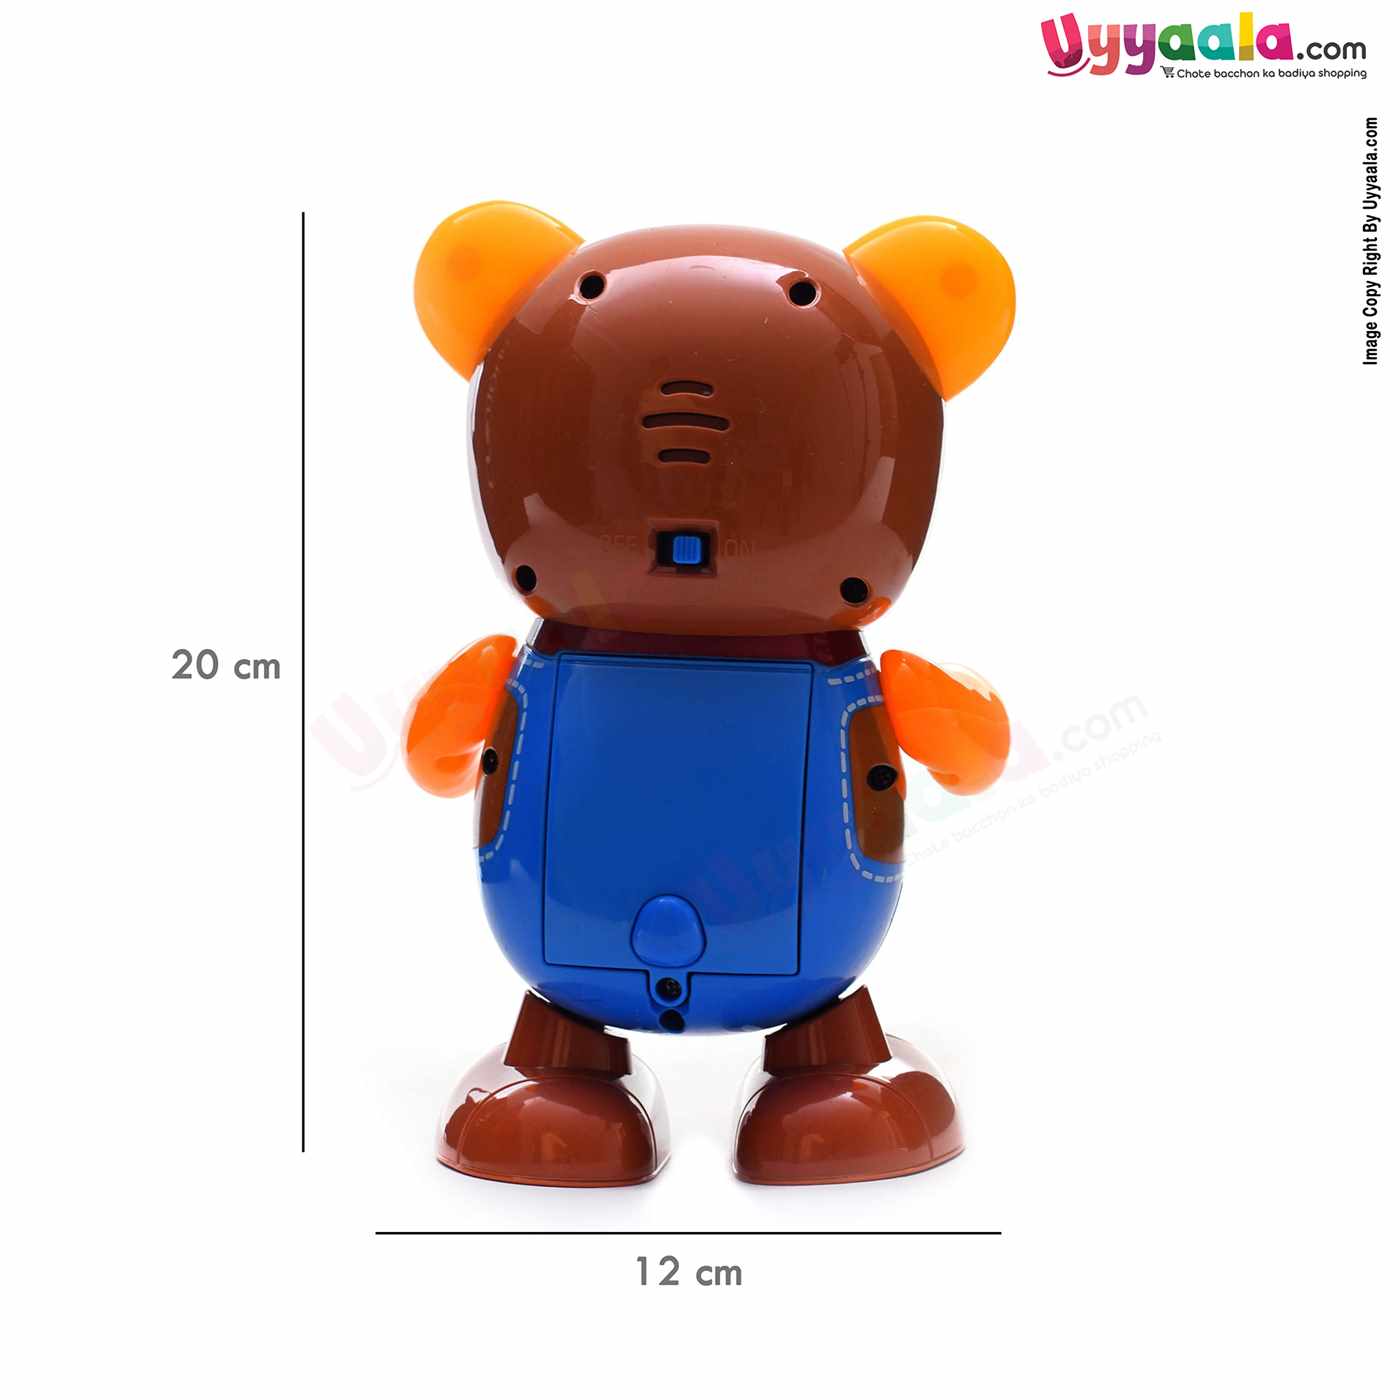 Buy Dancing Teddy Bear Battery Toy with flashing Music & Lights Online in India at uyyaala.com